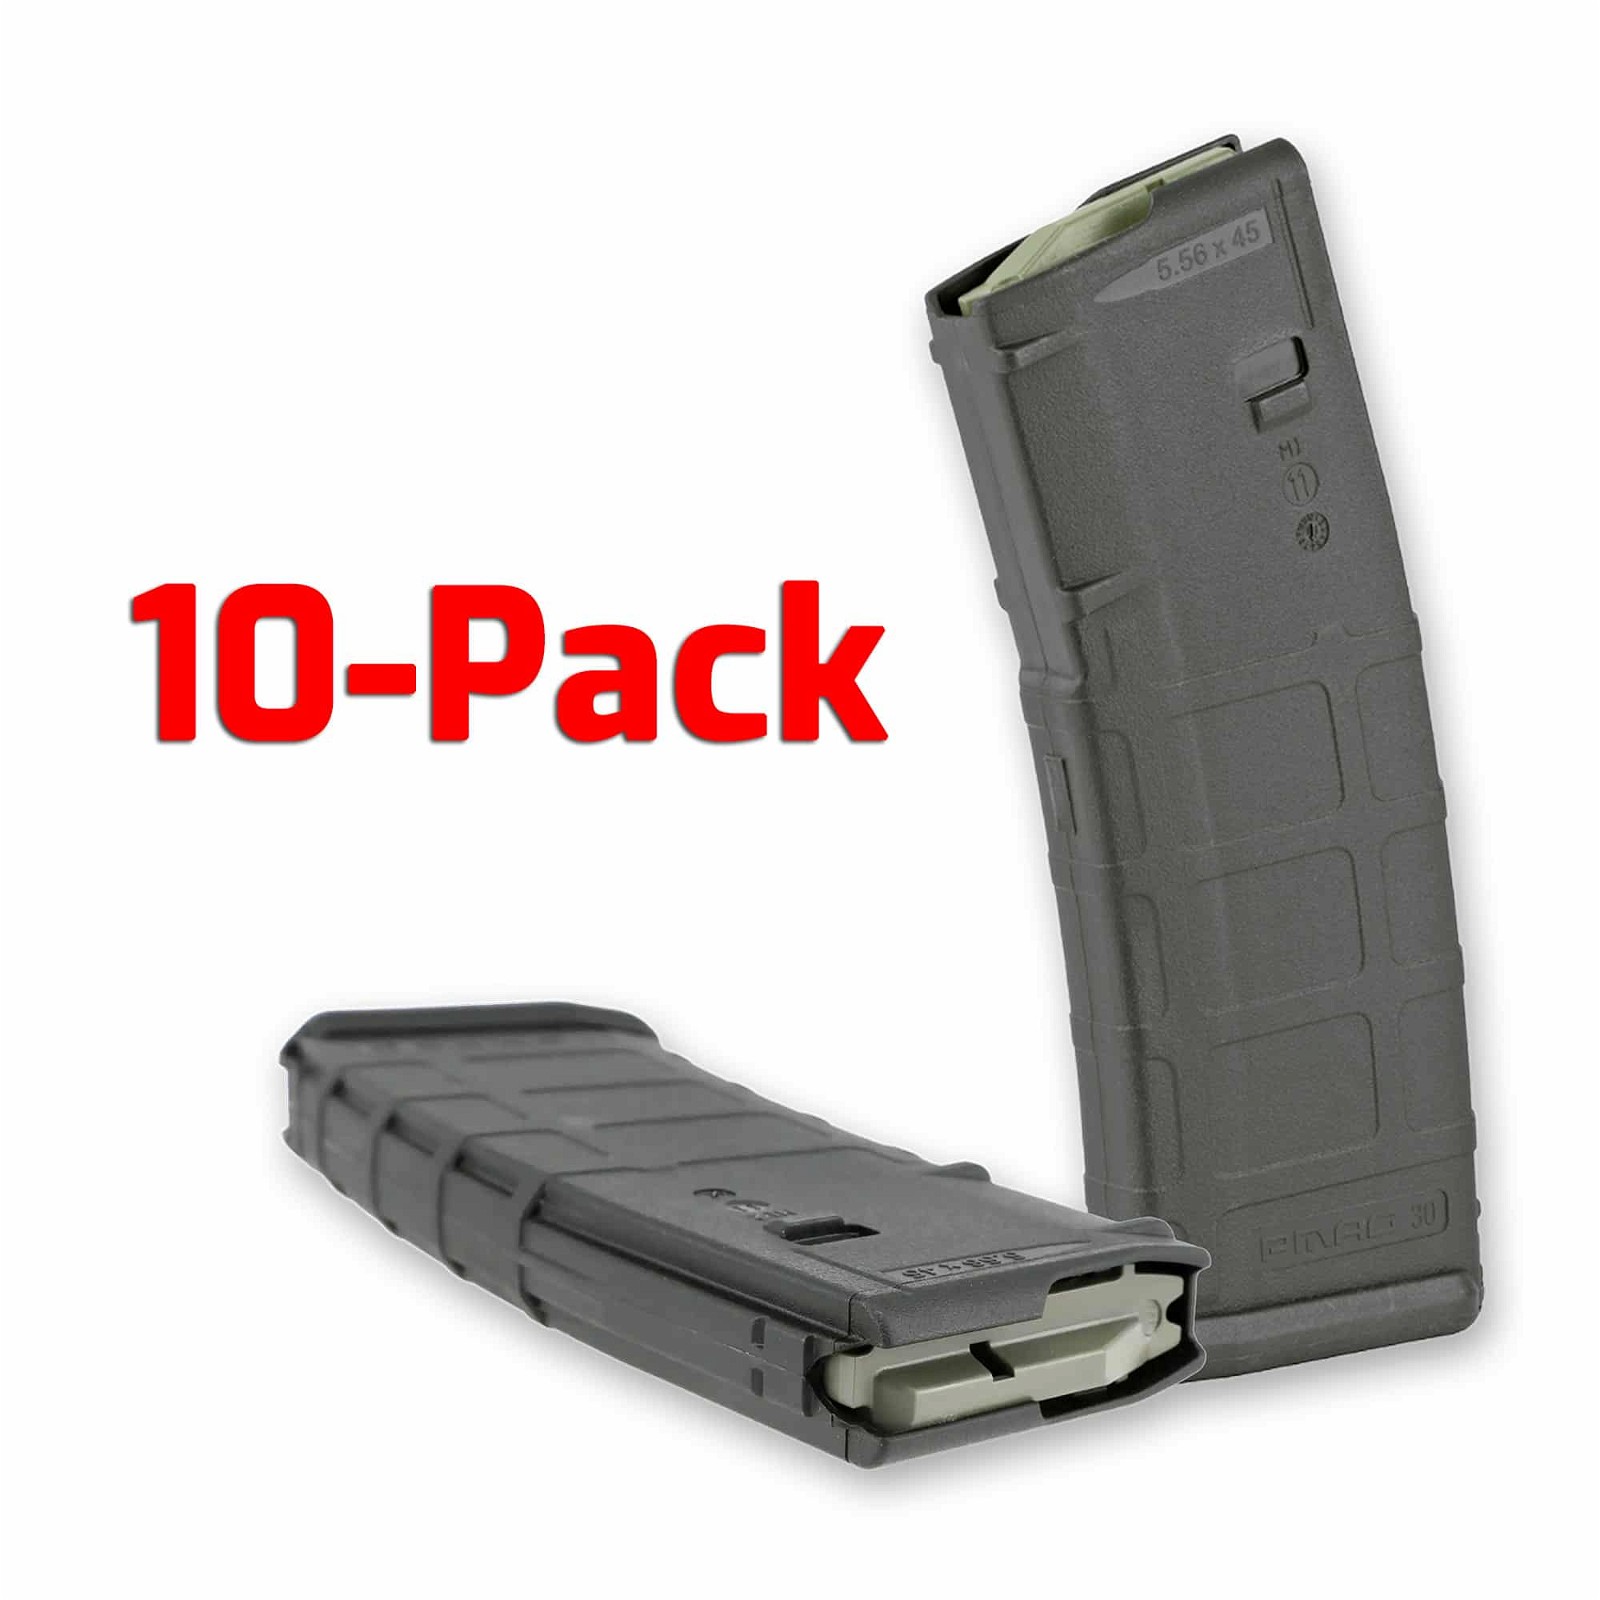 Buy Bulk PMAGs | 30 Round M2 MAG571 AR15 Magazines | Up to 100!